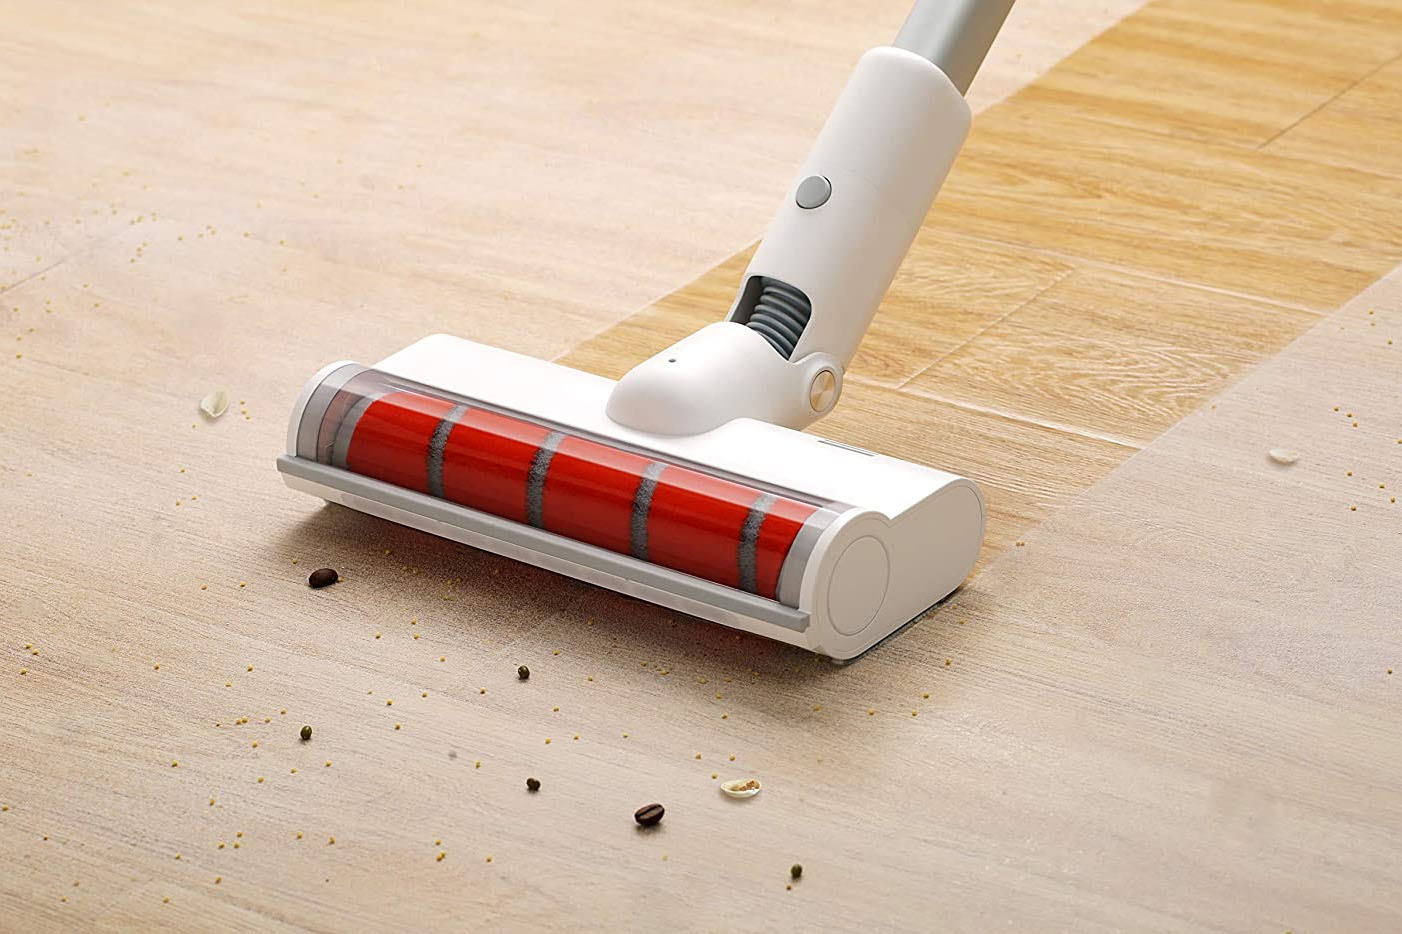 What Are The Characteristics Of A Good Vacuum Cleaner Soft Velvet Roller Brush?